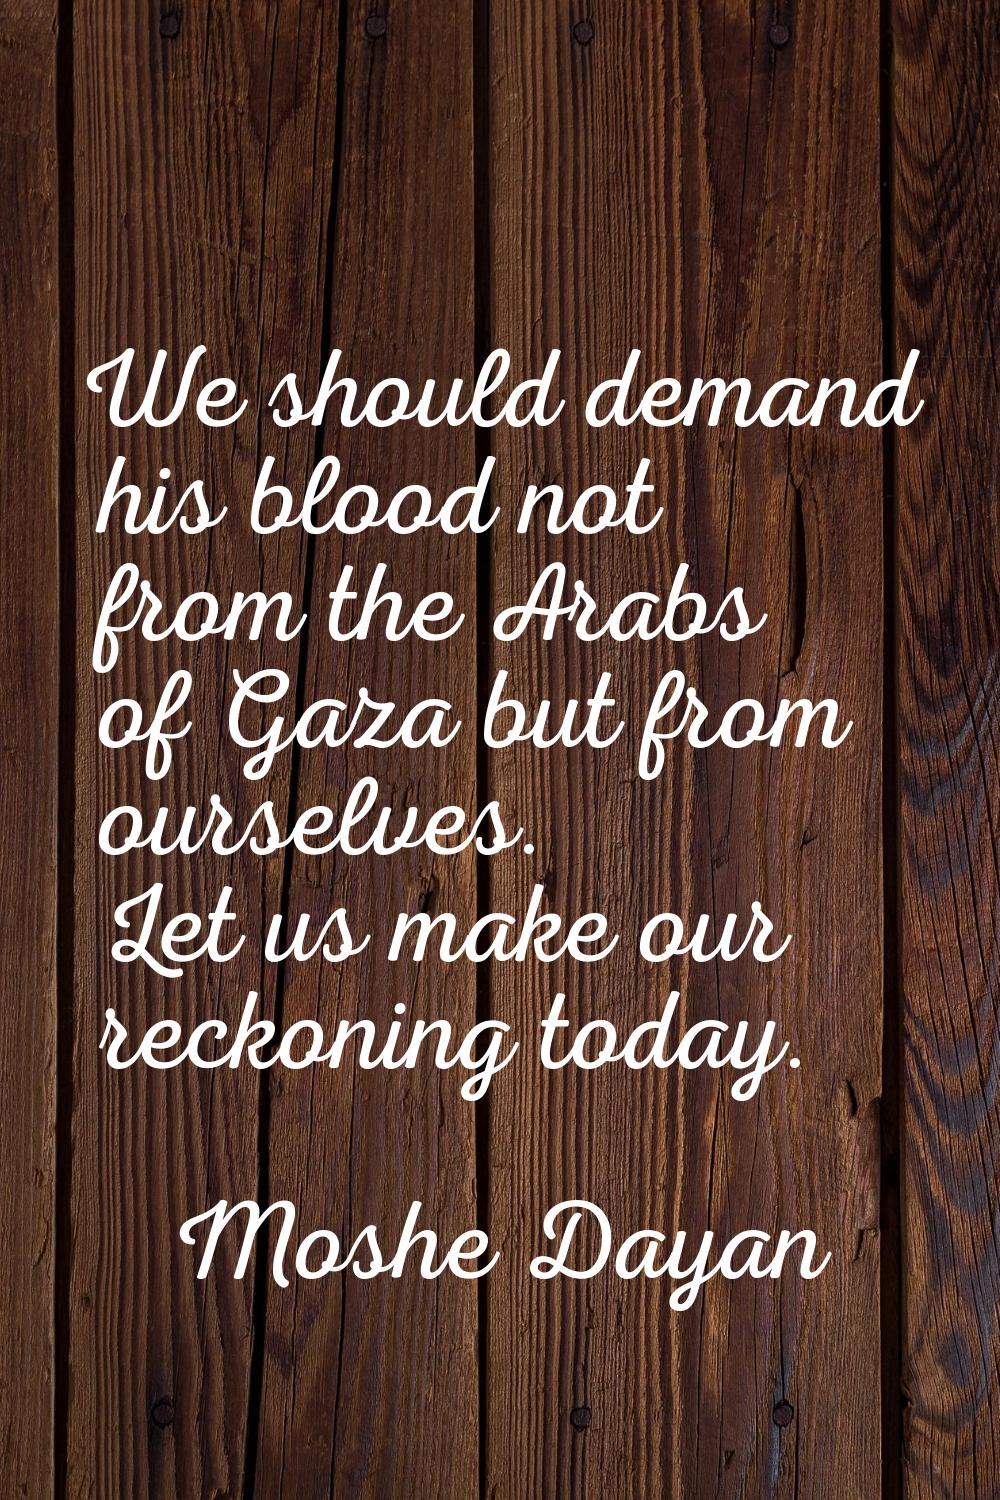 We should demand his blood not from the Arabs of Gaza but from ourselves. Let us make our reckoning